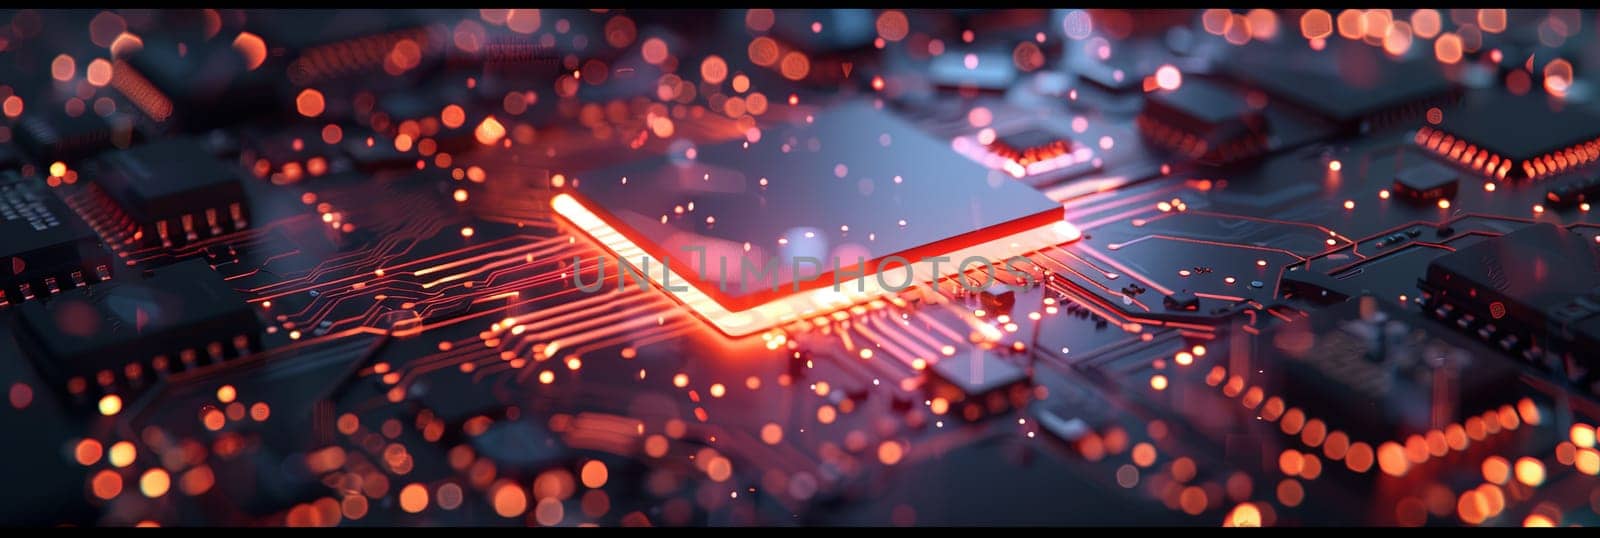 A close-up image of a modern microprocessor on a motherboard, illuminated by glowing red light effects and surrounded by intricate digital data streams.